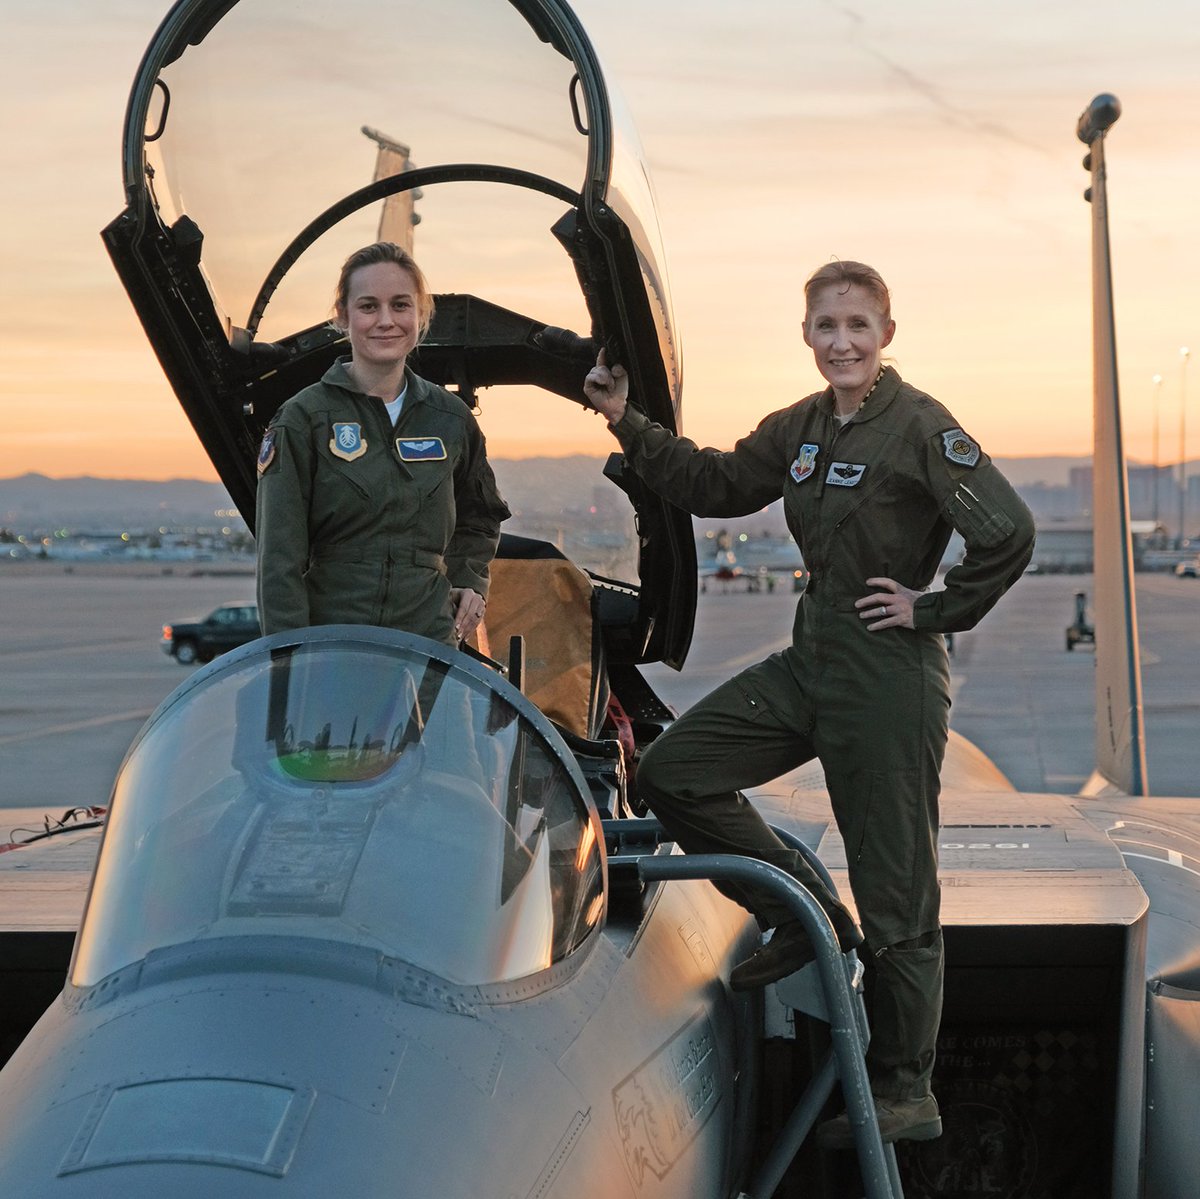 Production has begun on Marvel Studios' #CaptainMarvel. @BrieLarson receives instructions from Brigadier General Jeannie Leavitt, 57th Wing Commander, on a recent visit to Nellis Air Force Base in Nevada to research her character.